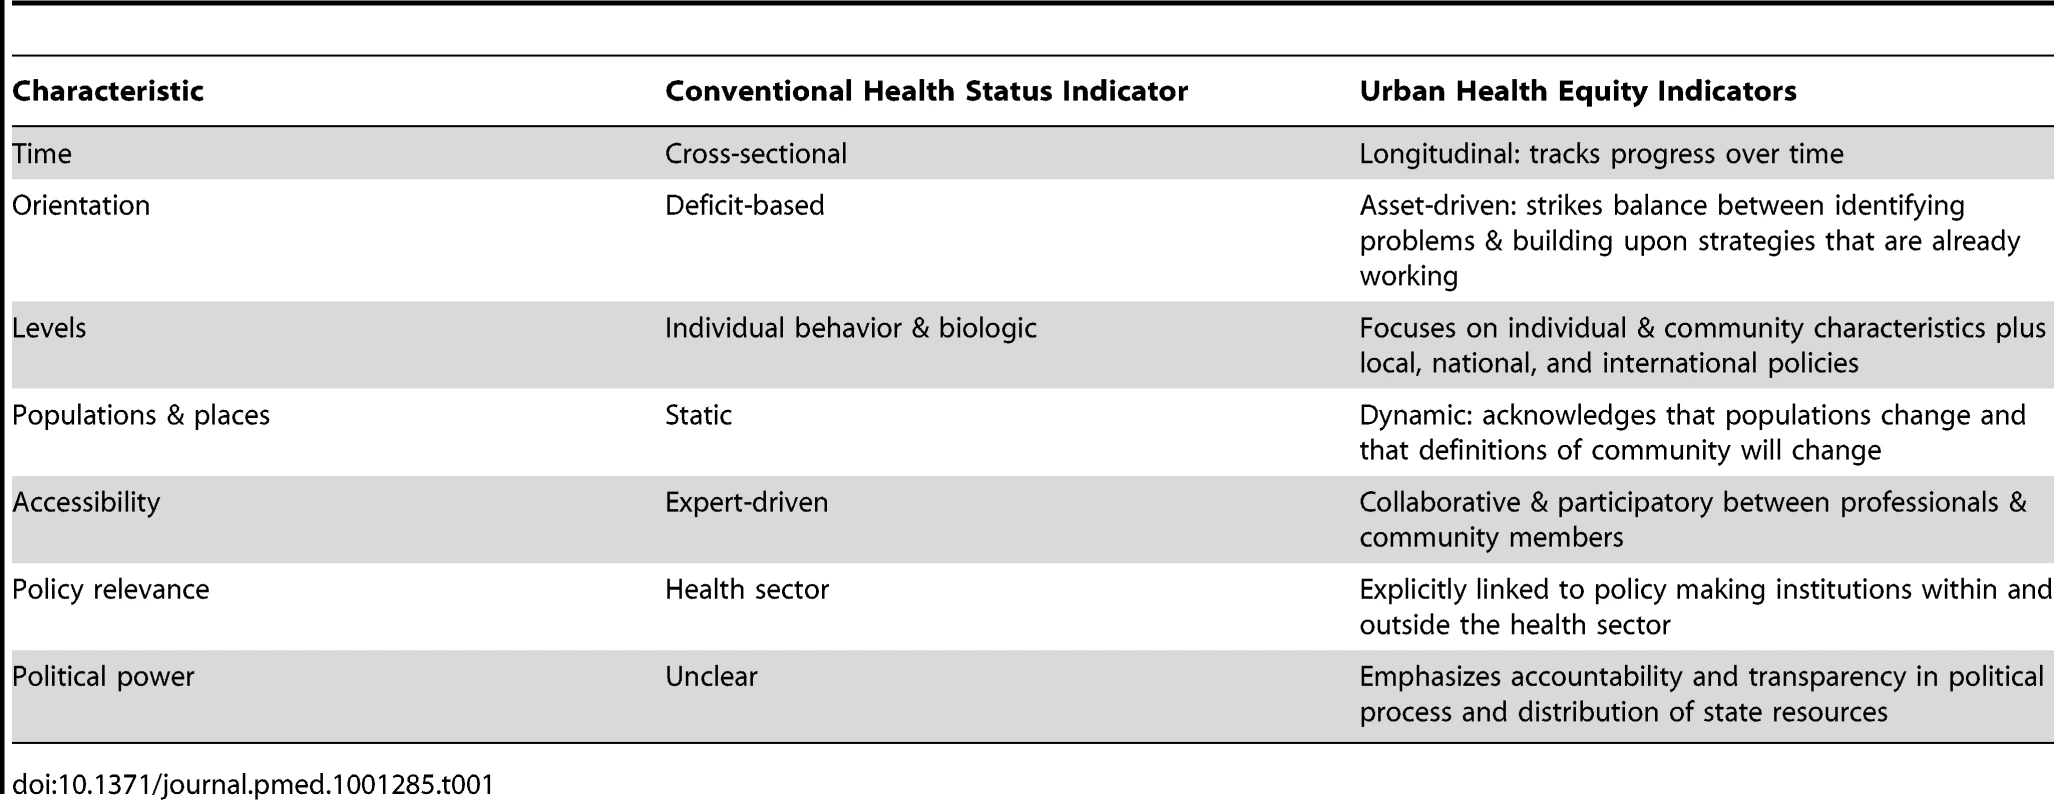 Comparison of conventional and our approach to urban health equity indicators.